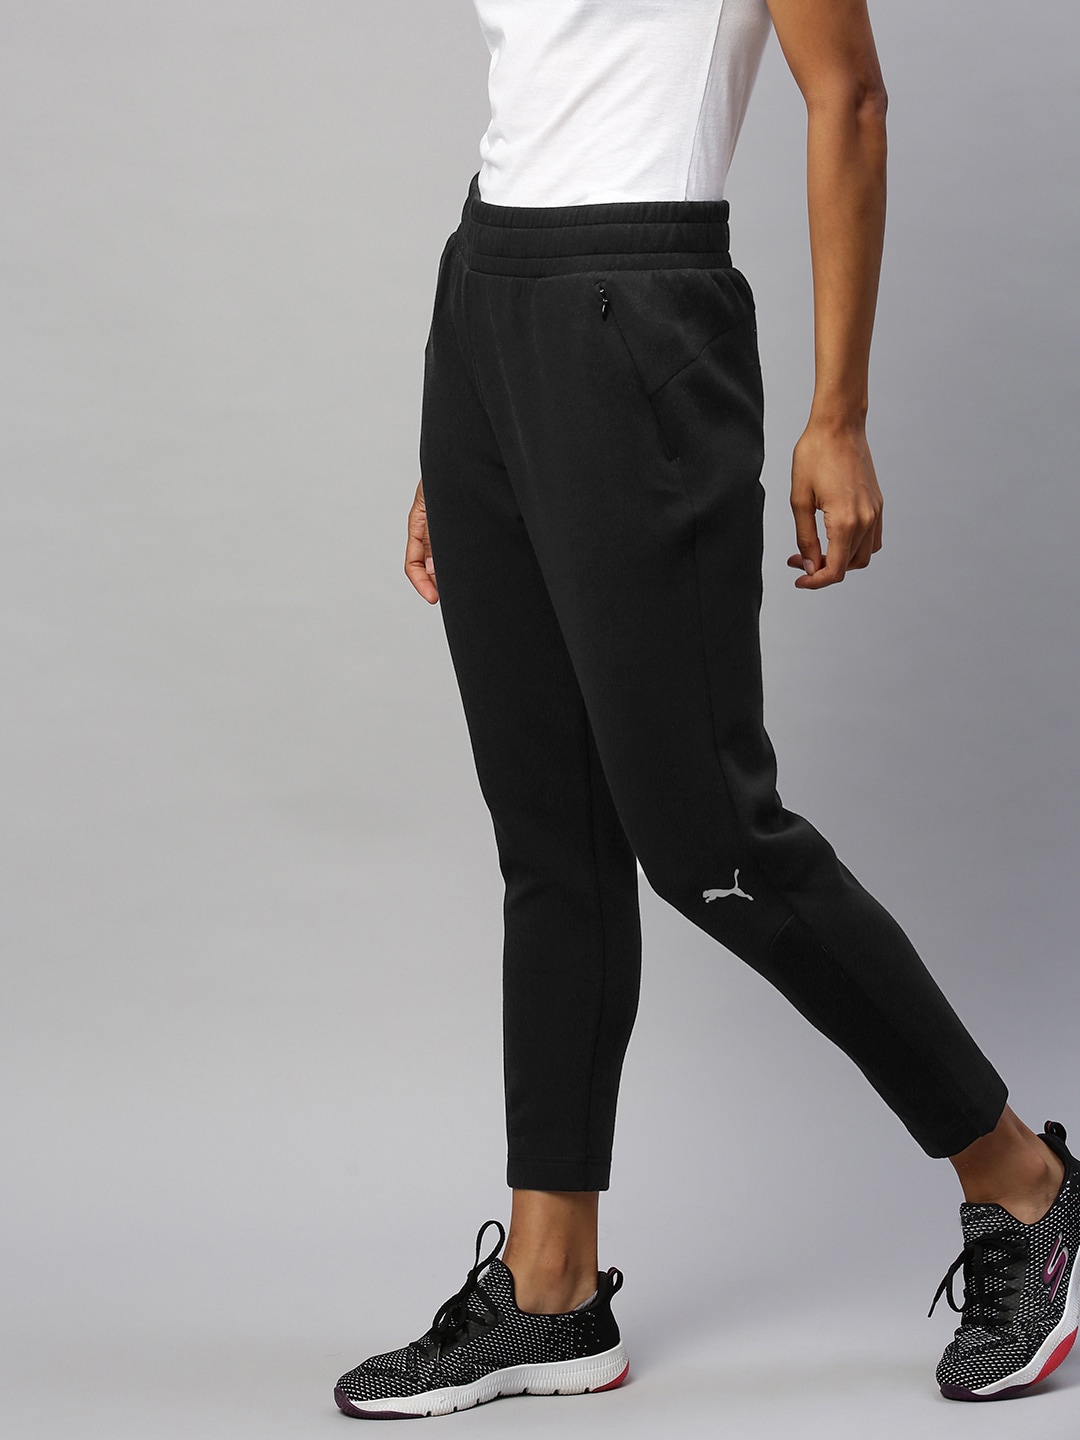 Puma Women Black Solid Straight Fit Evostripe Cropped Track Pants Price in India